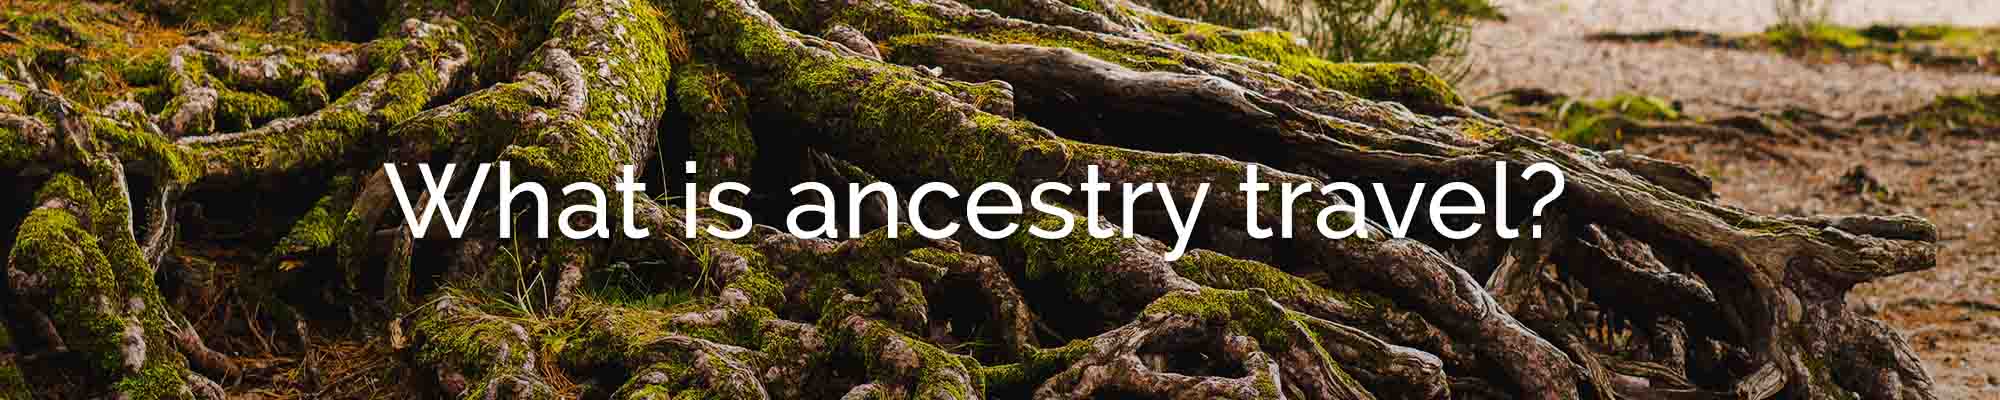 What is ancestry travel?